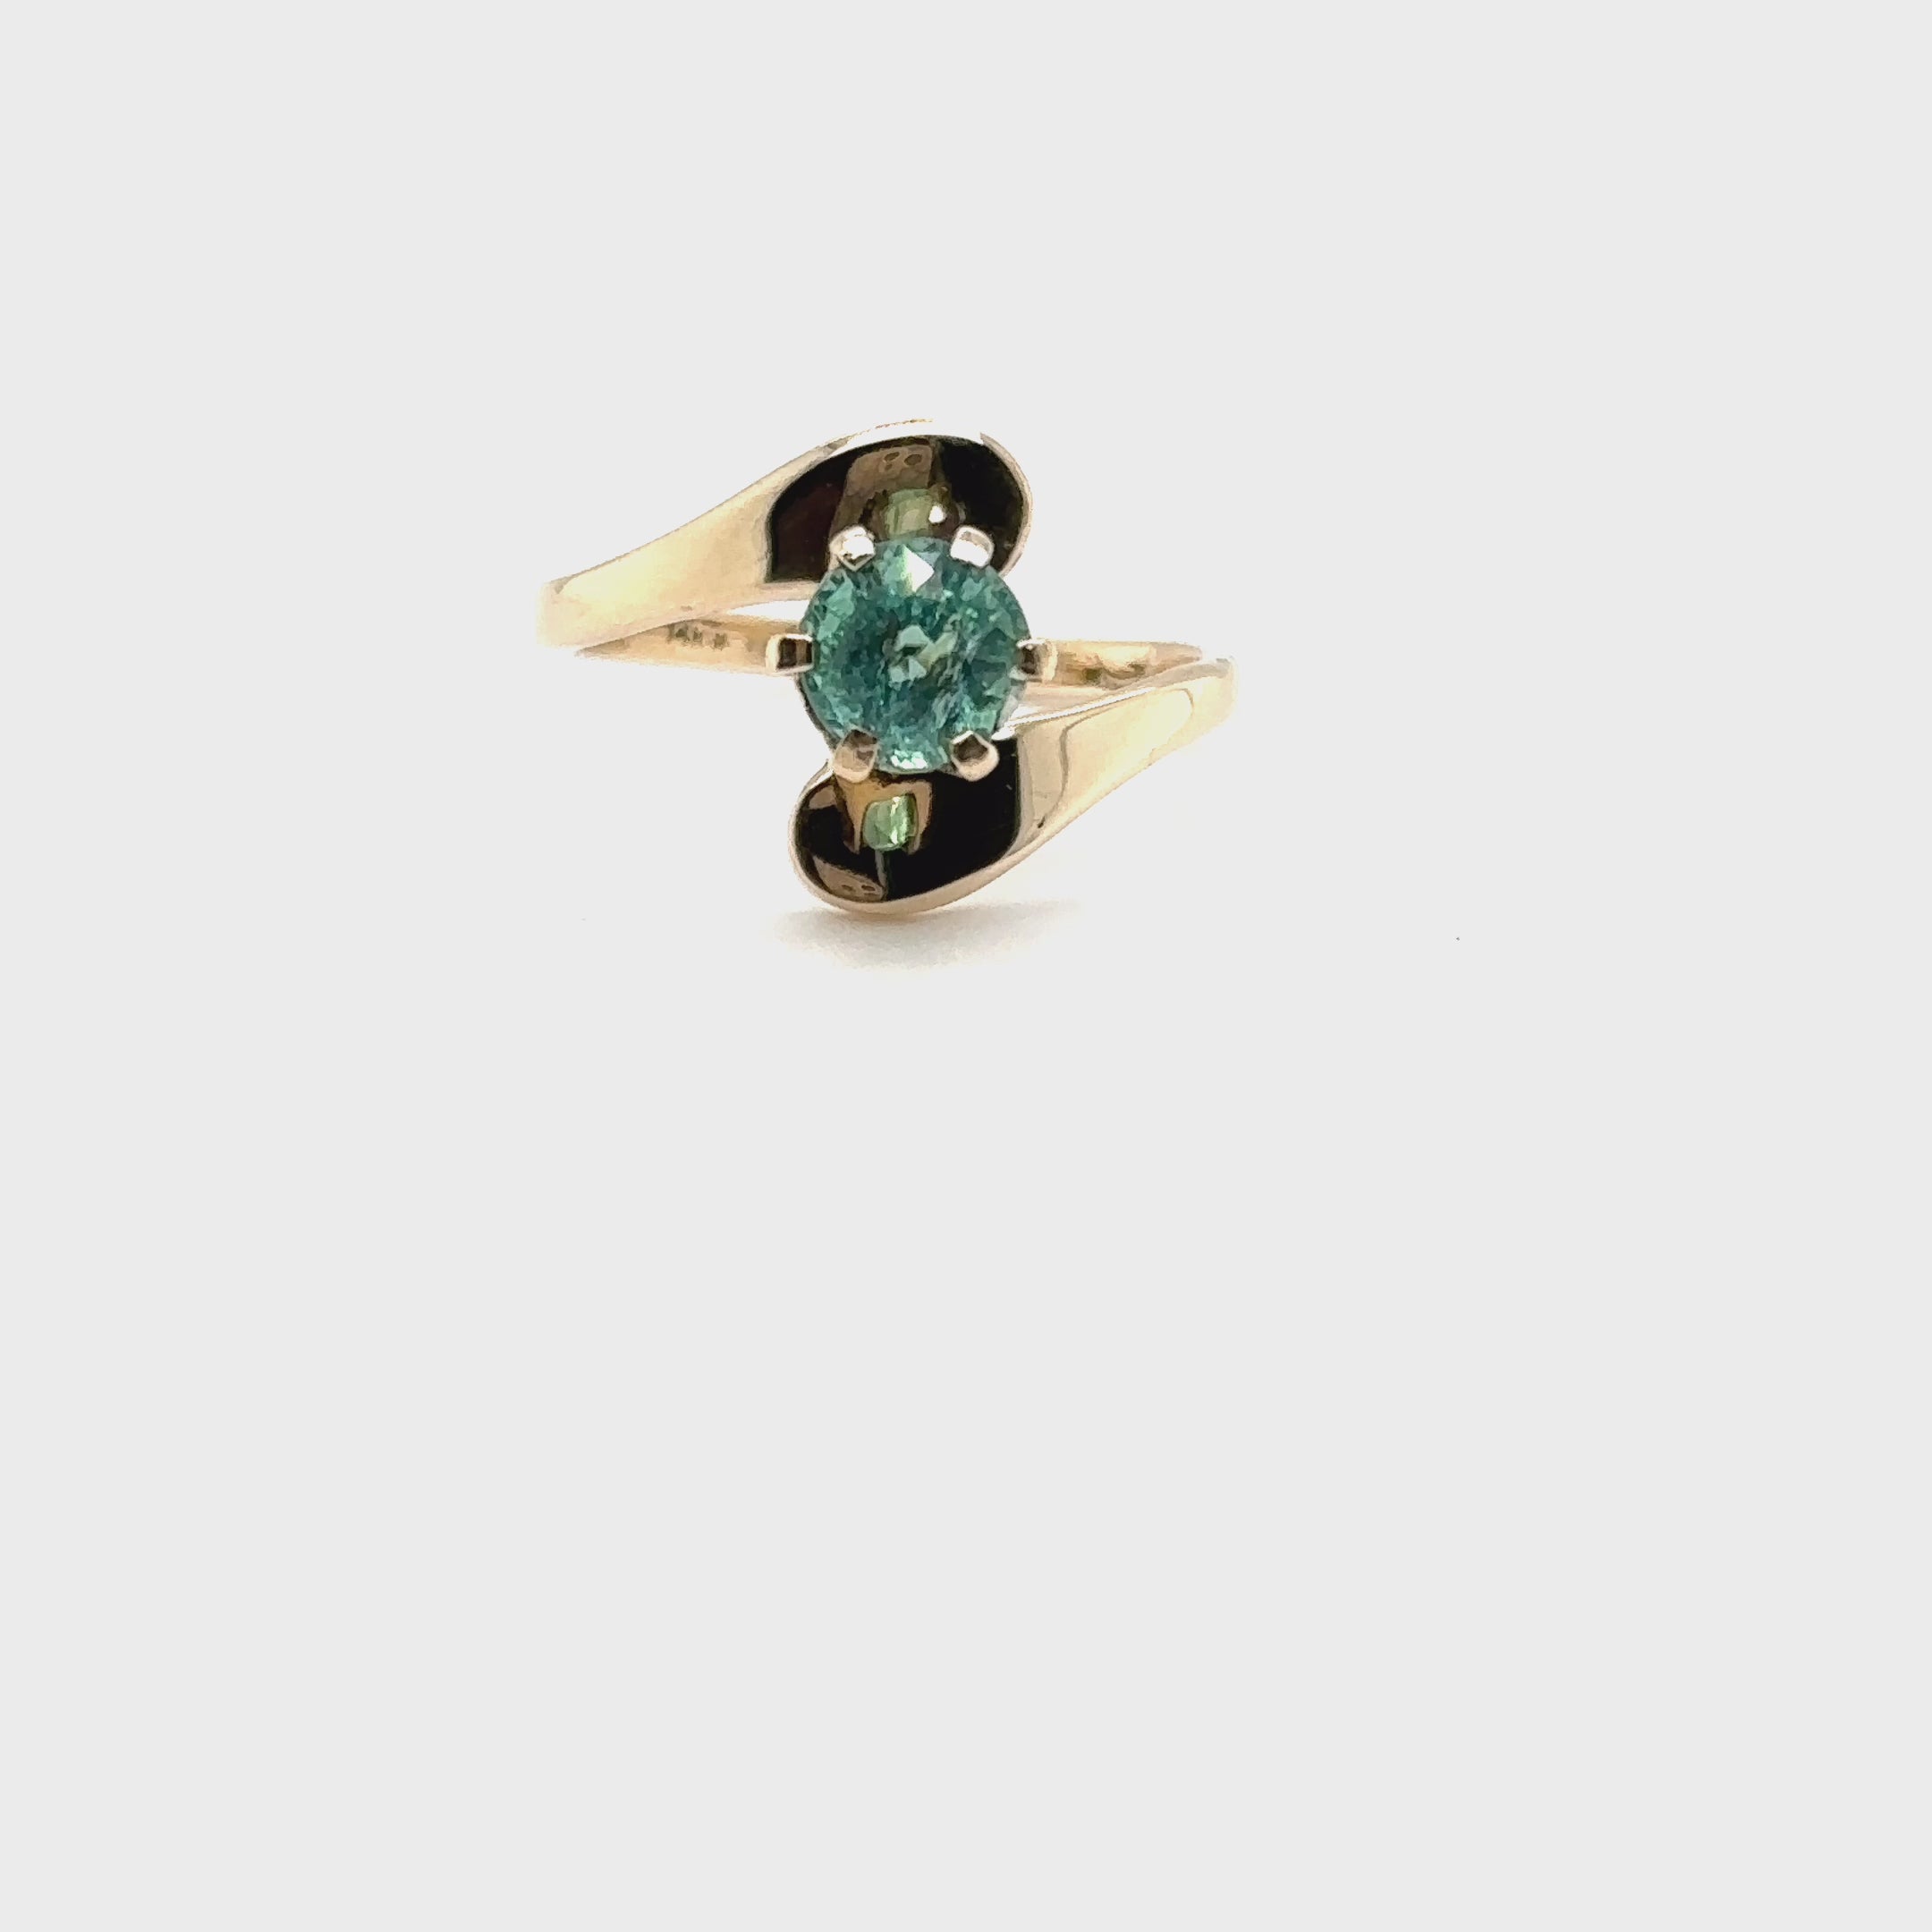 Natural Paraiba Tourmaline Ring 14K Solid Gold .72ct Solitaire Ring Fine Womens Ring Estate Jewelry Gemstone Ring Statement Ring Birthstone